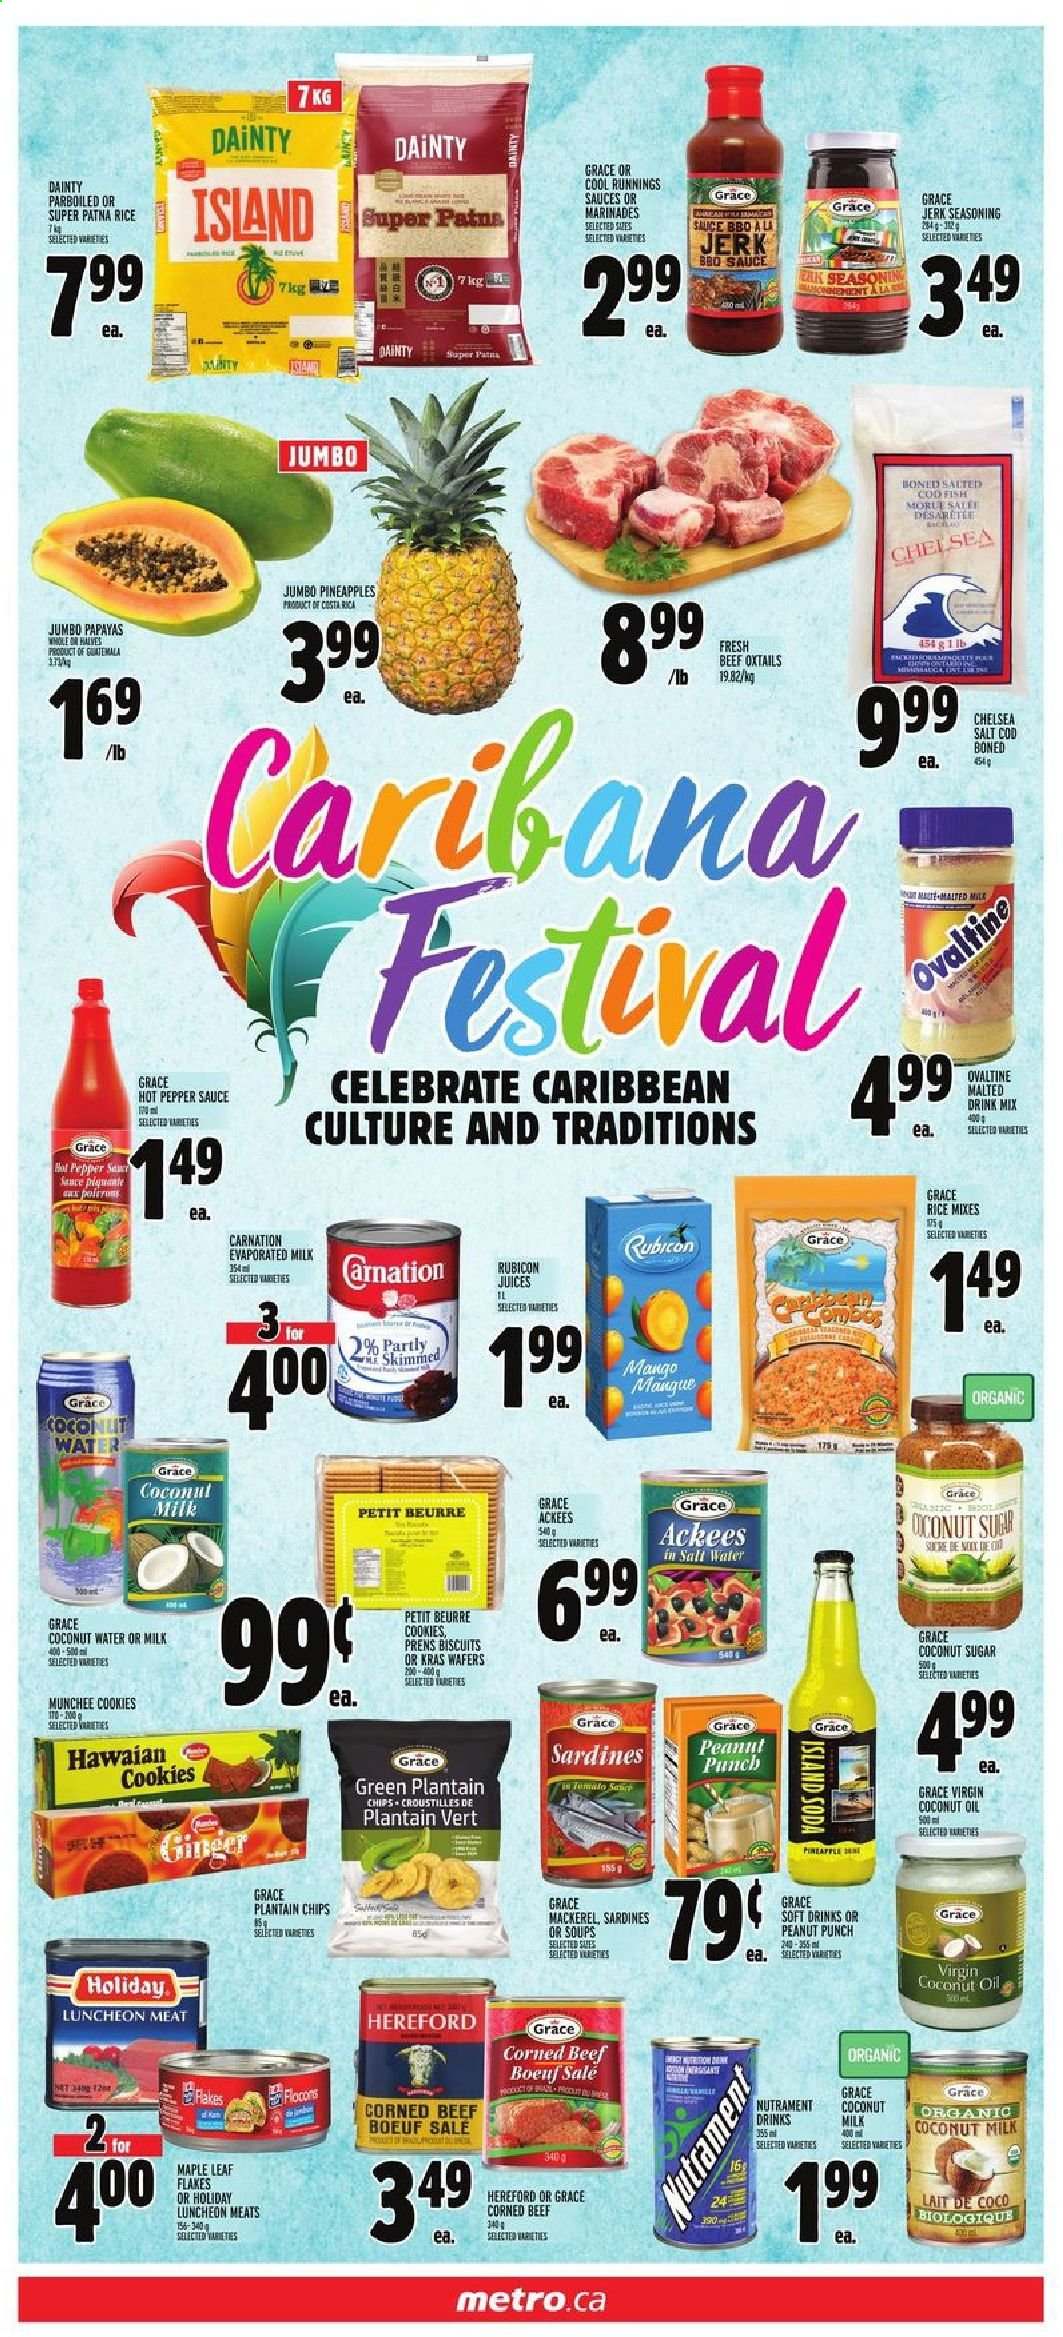 thumbnail - Metro Flyer - July 22, 2021 - July 28, 2021 - Sales products - ginger, pineapple, cod, mackerel, sardines, fish, lunch meat, corned beef, evaporated milk, Ola, cookies, wafers, biscuit, sugar, coconut sugar, coconut milk, spice, coconut oil, oil, juice, coconut water, soft drink, soda, punch, beef meat, chips, deodorant. Page 7.